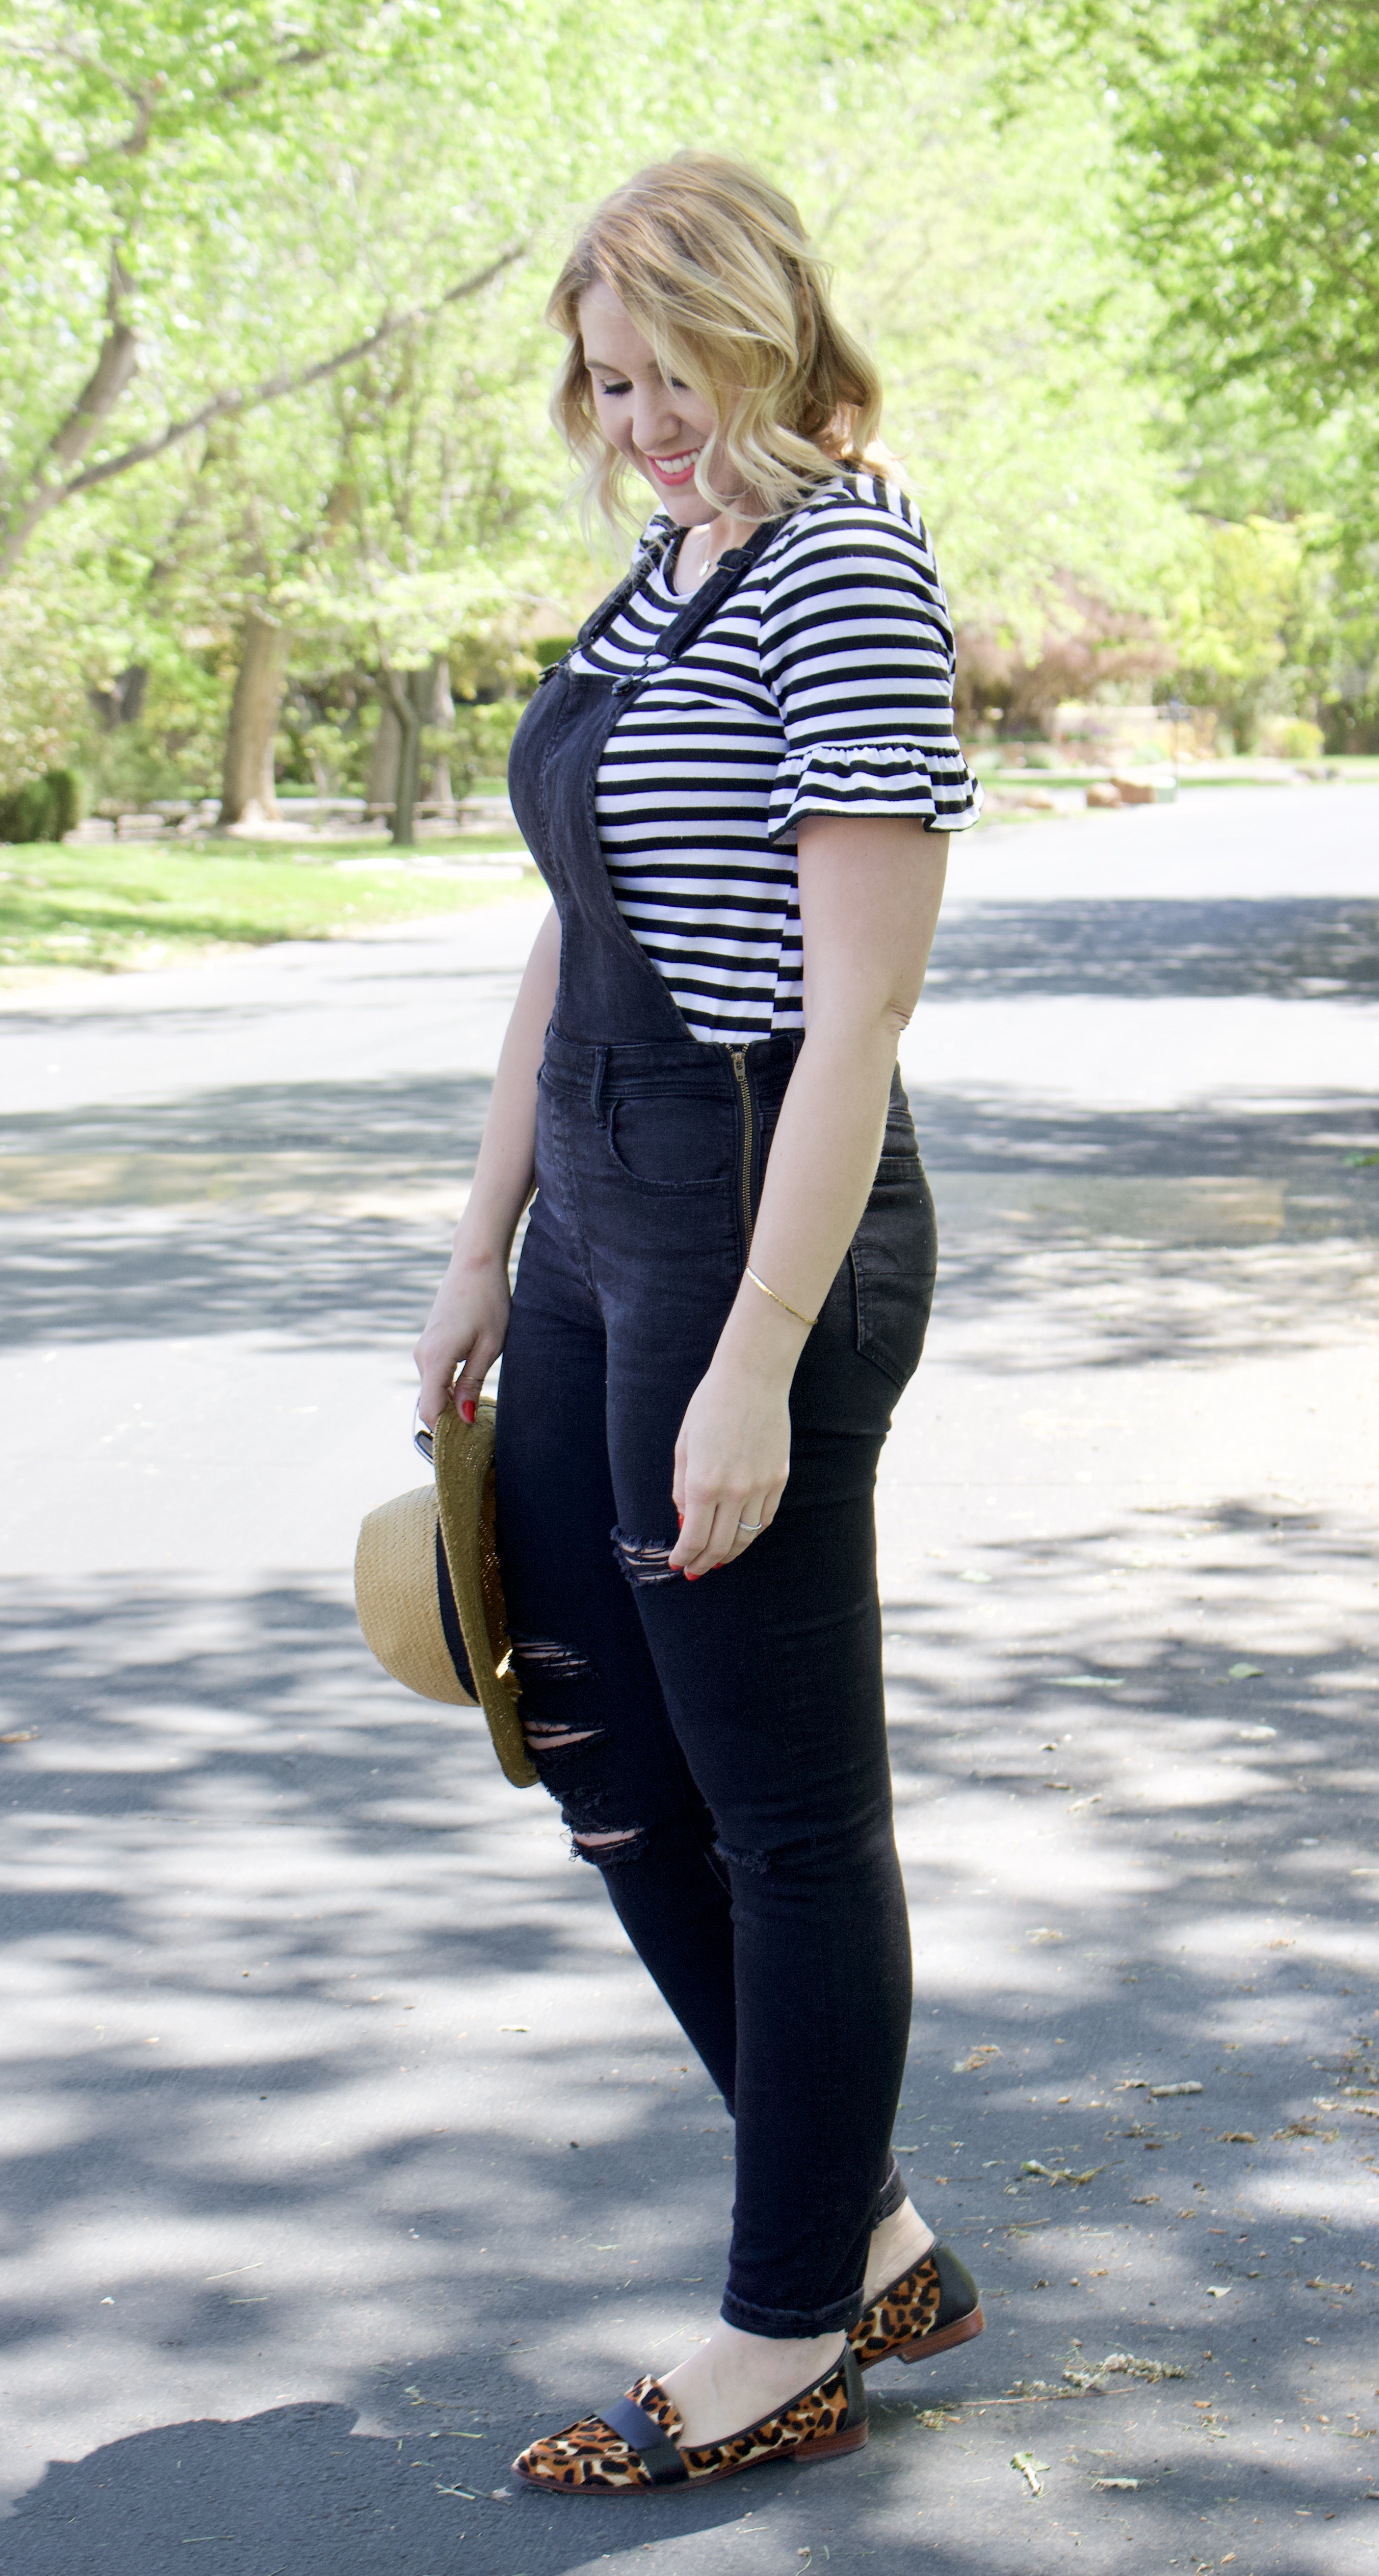 how to style black distressed overalls #overallsoutfit #overalls #curvyfashion #stripes